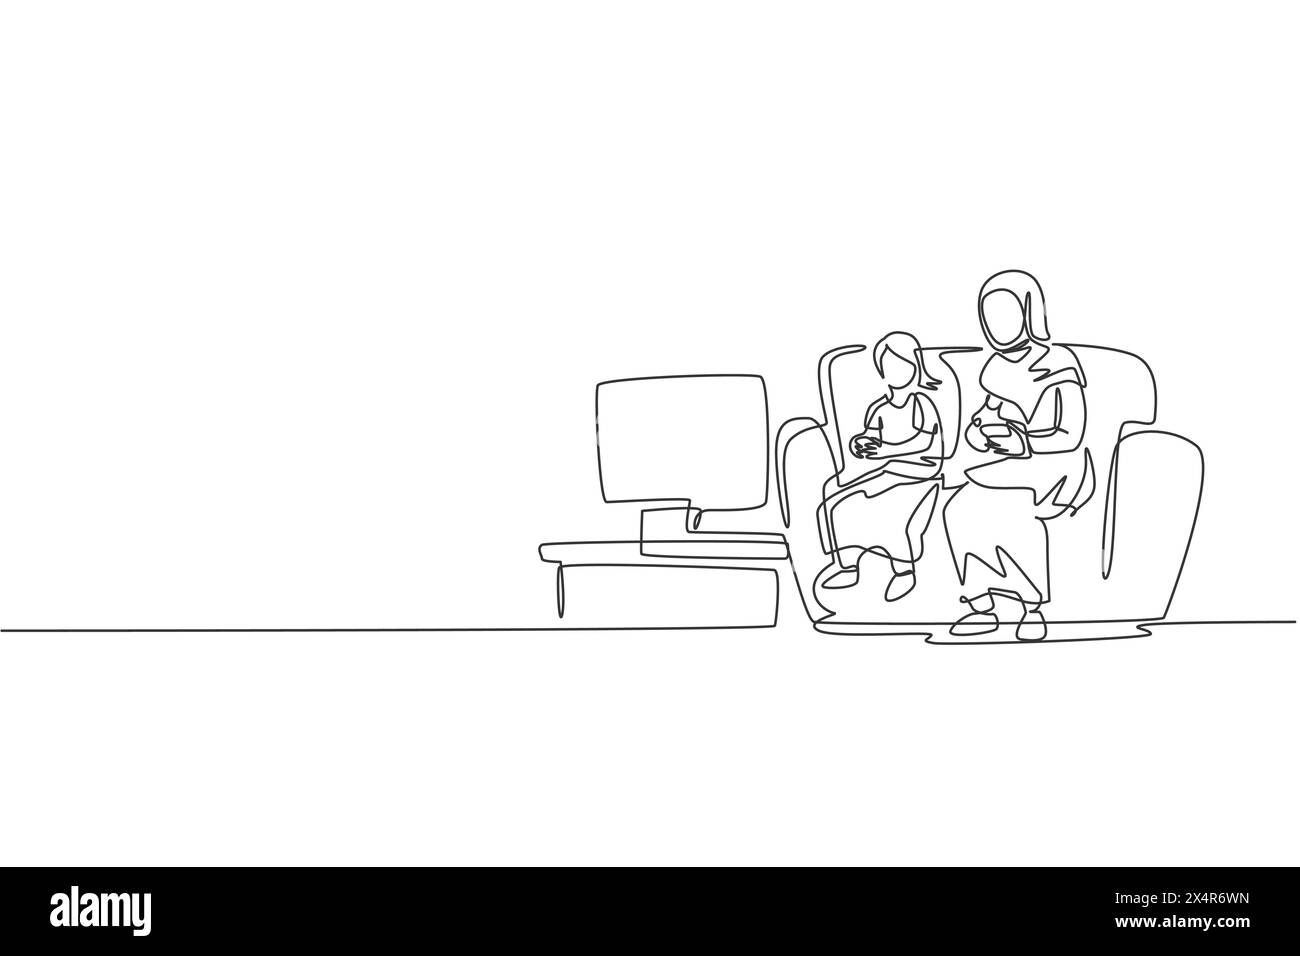 Single continuous line drawing of young Islamic mom playing video game together with her daughter on sofa. Arabian muslim happy family motherhood conc Stock Vector